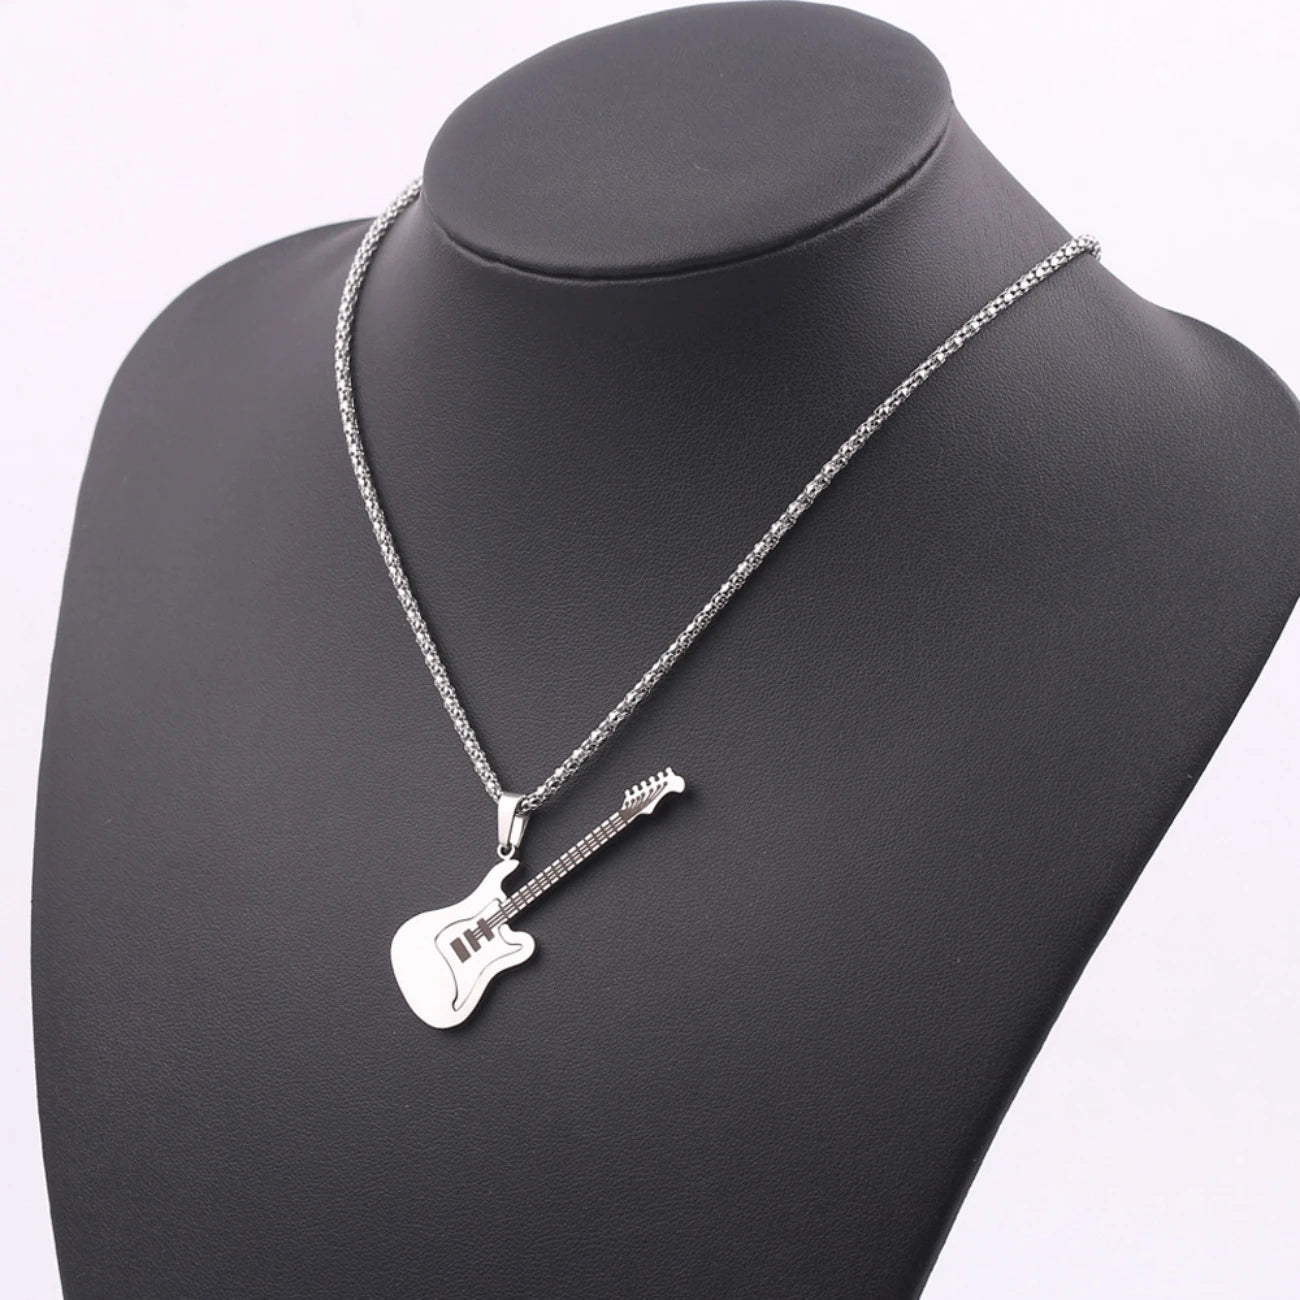 Engraved Stainless Steel Guitar Necklace